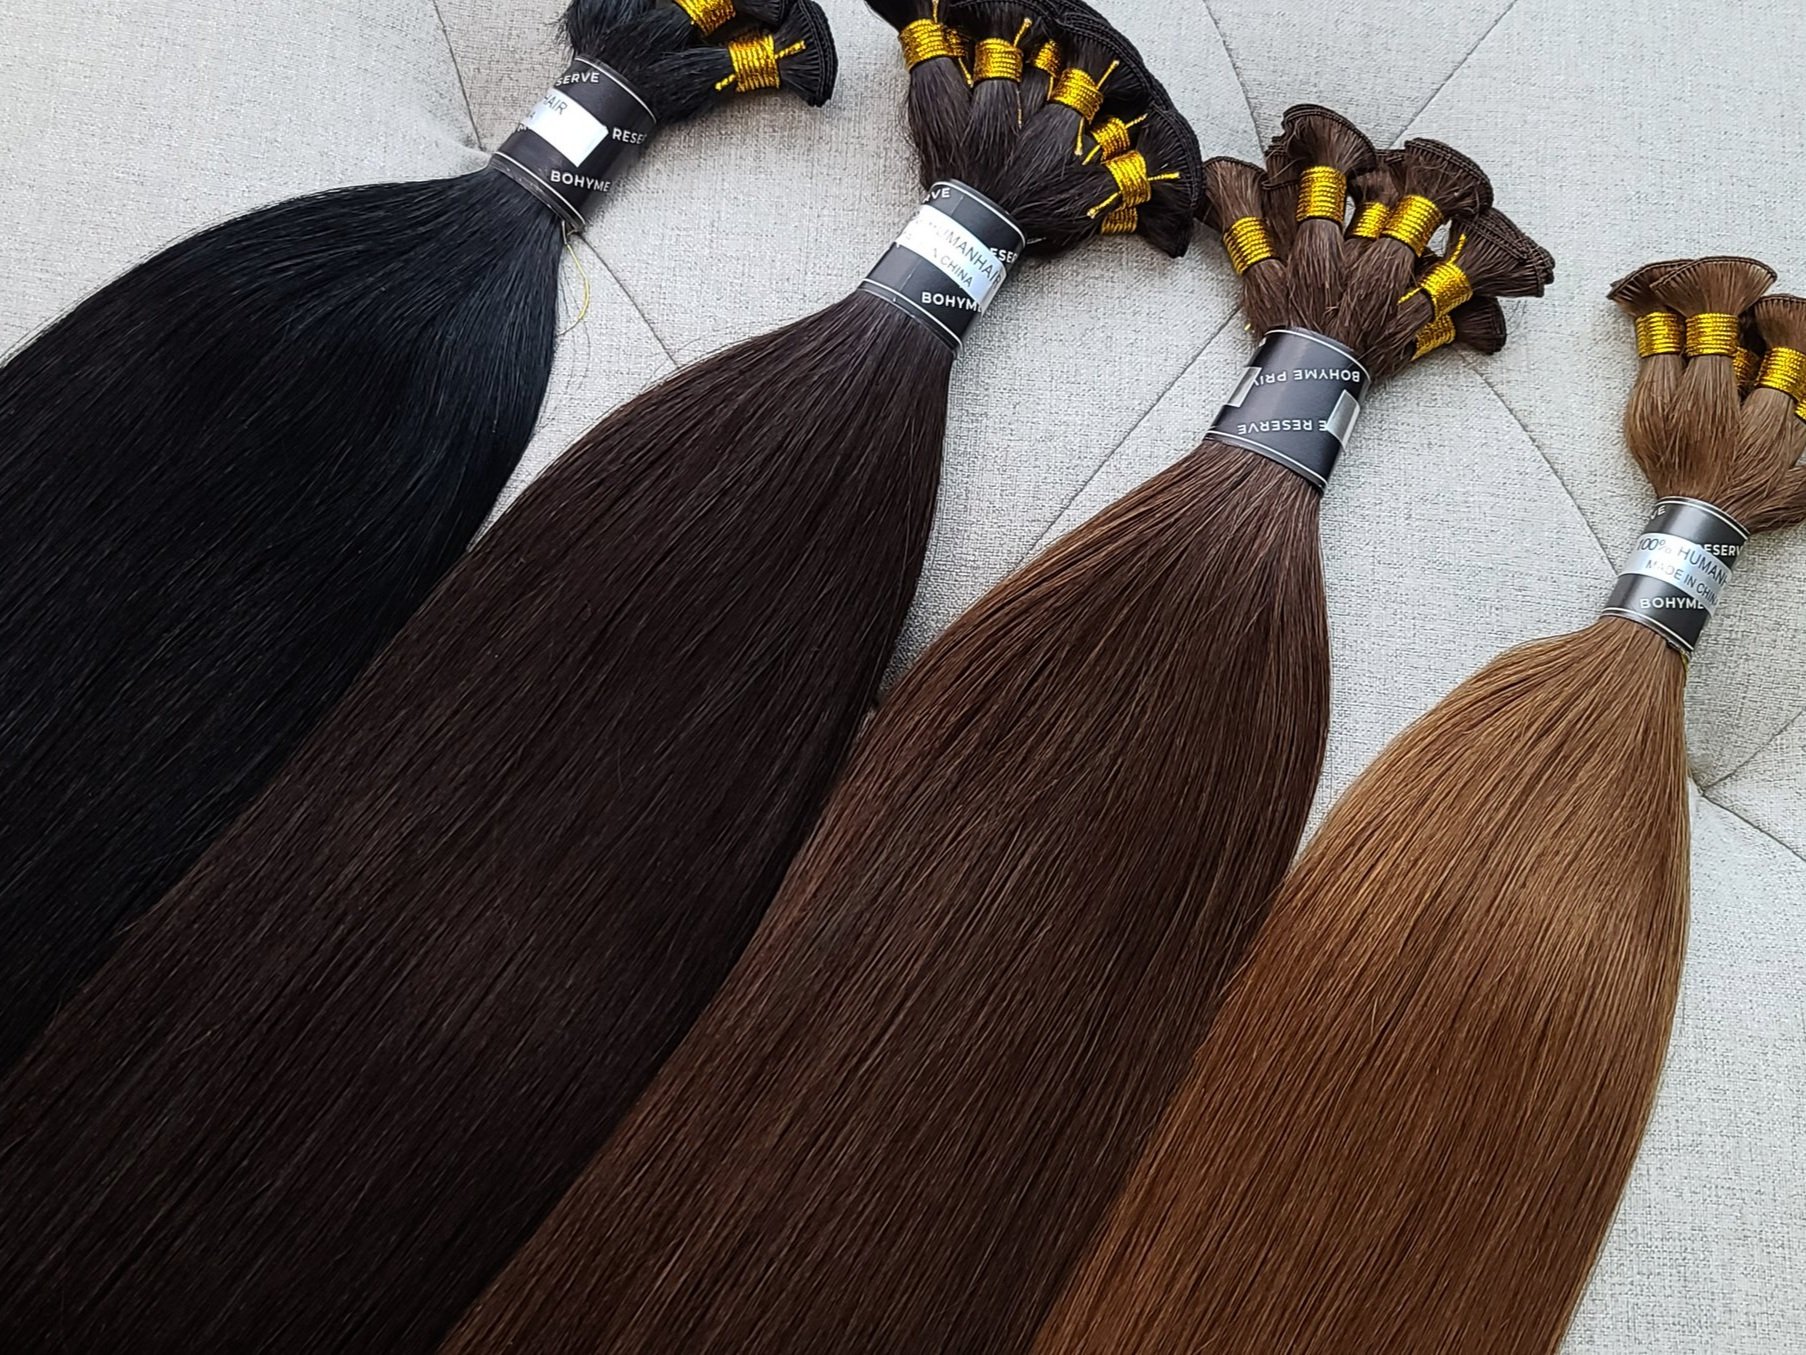 Wanna go darker?  - Private Reserve offers a beautiful range of dark & brunette colors, including our best-selling 1, 1B, 2 & 4! So rich & deep, like a creamy chocolate or rich velvet.